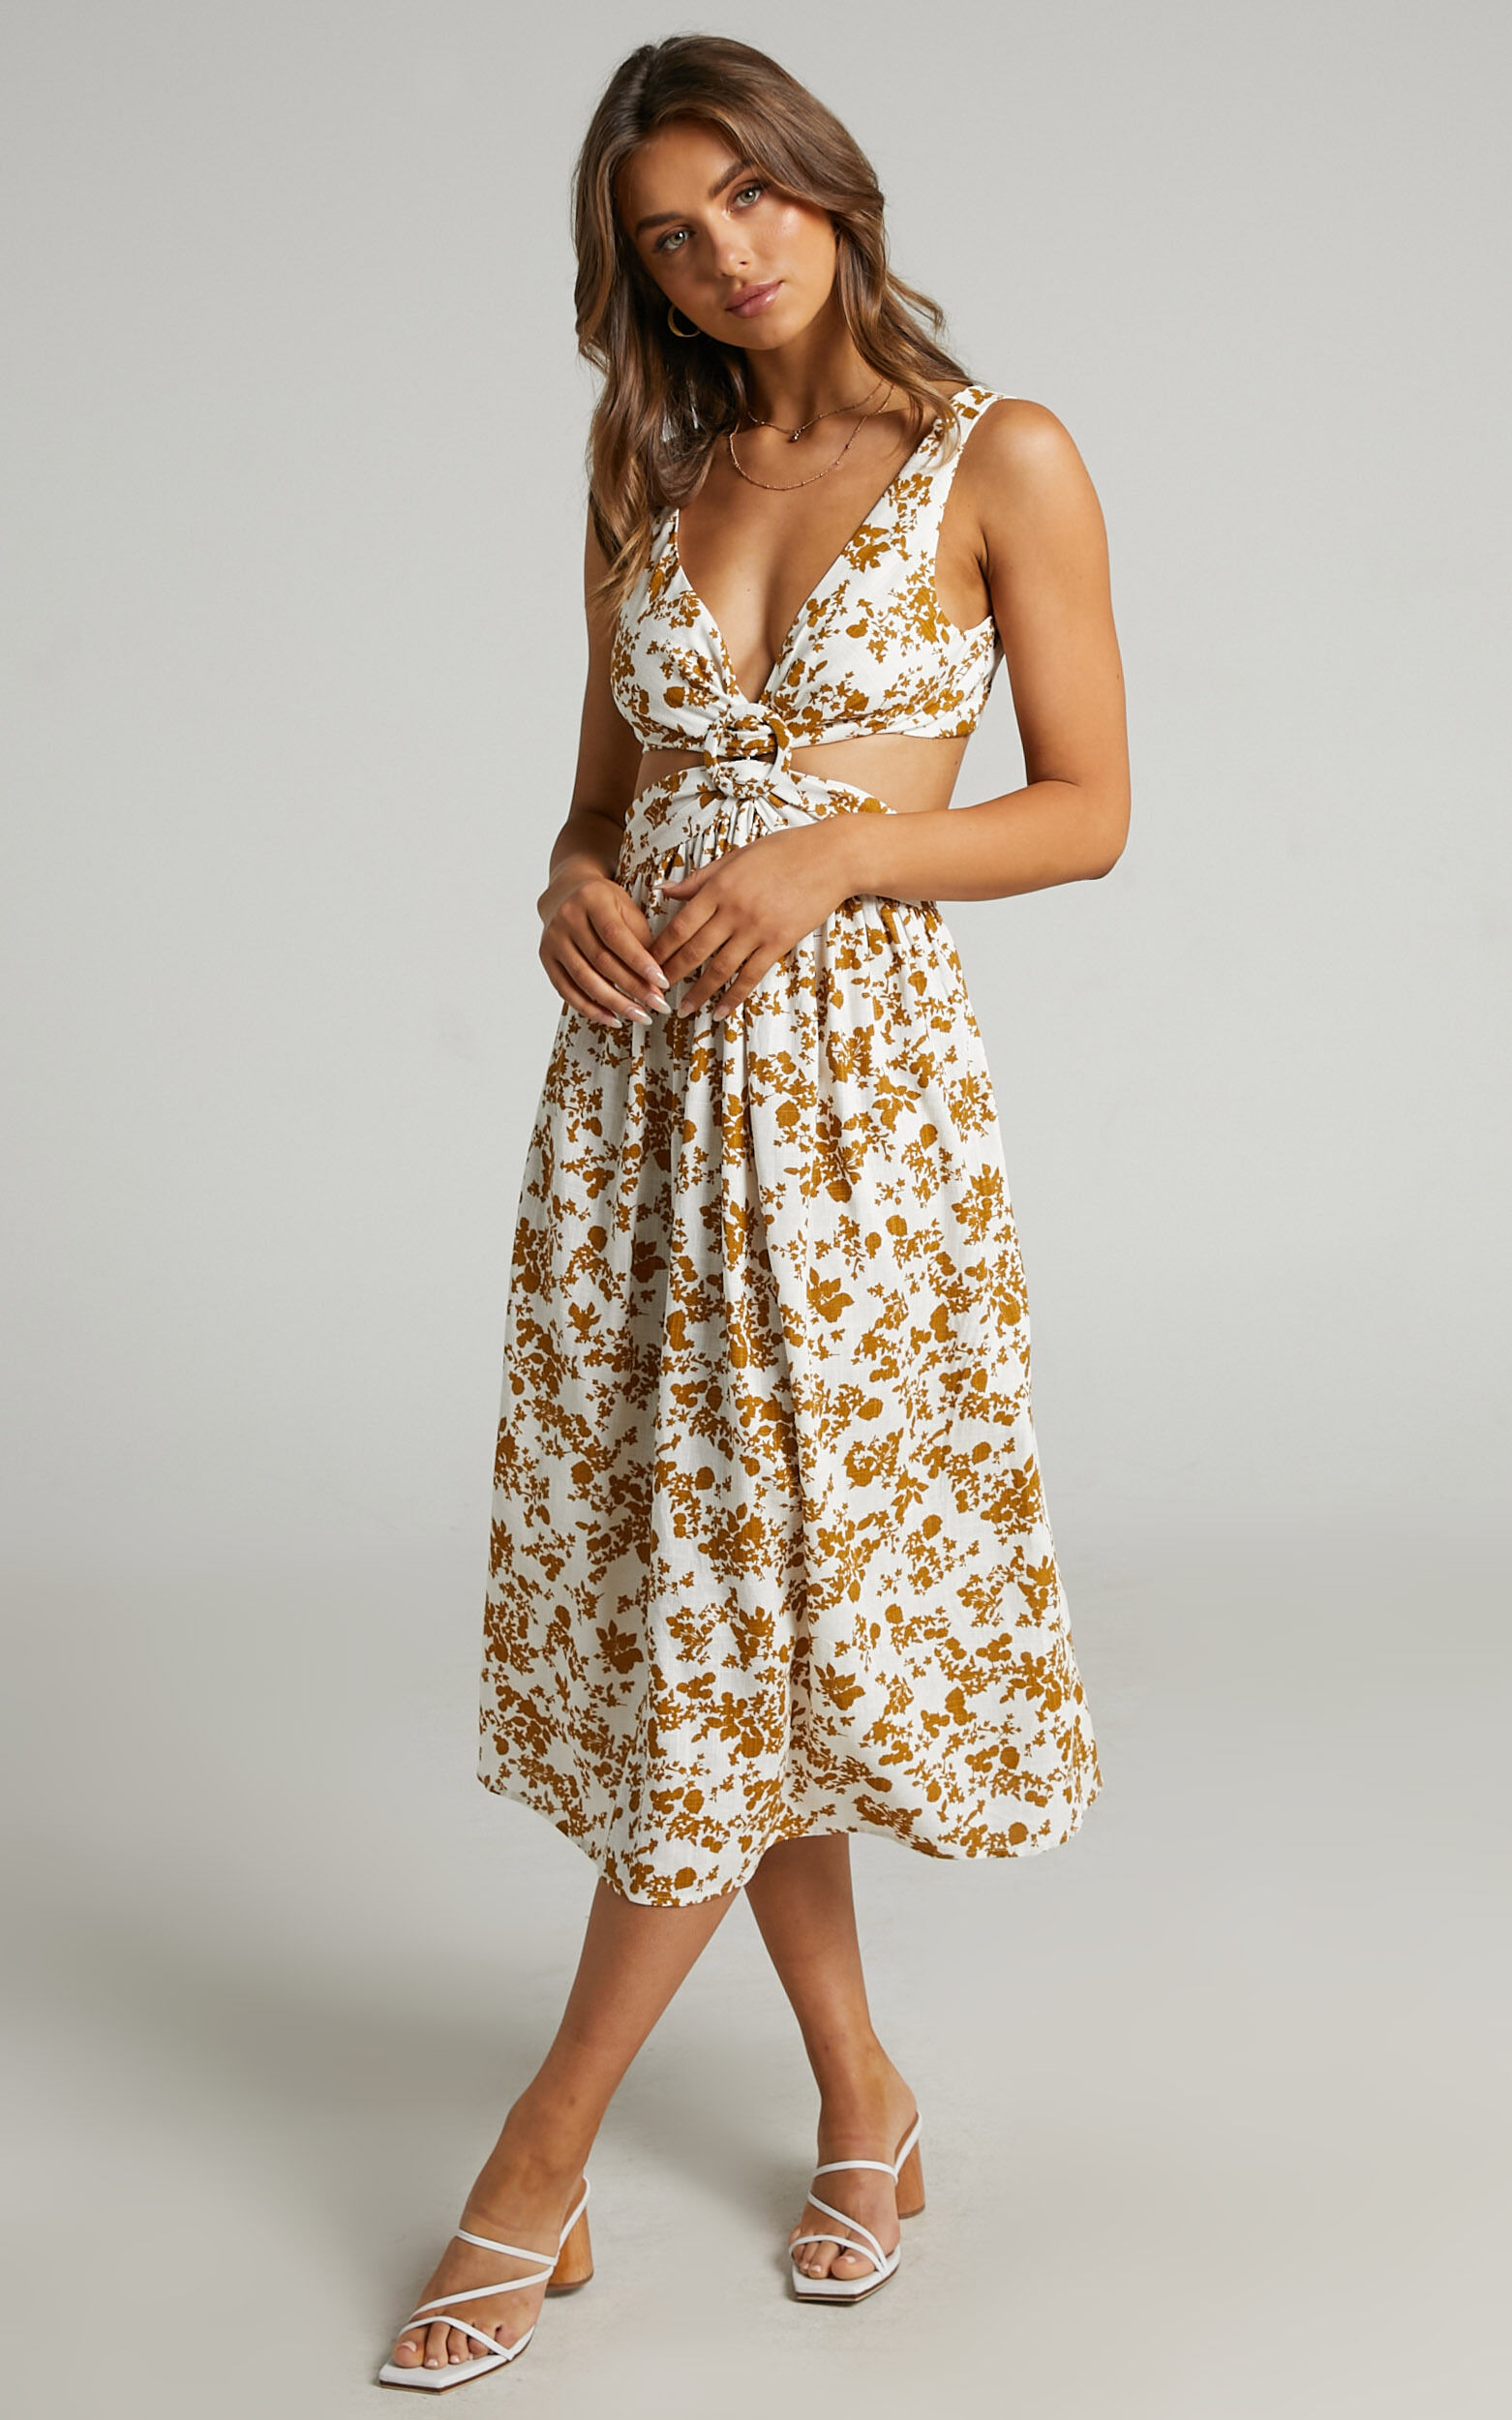 Timothea Sleeveless Ring Front Midi Dress in Mustard Floral - 06, YEL1, super-hi-res image number null